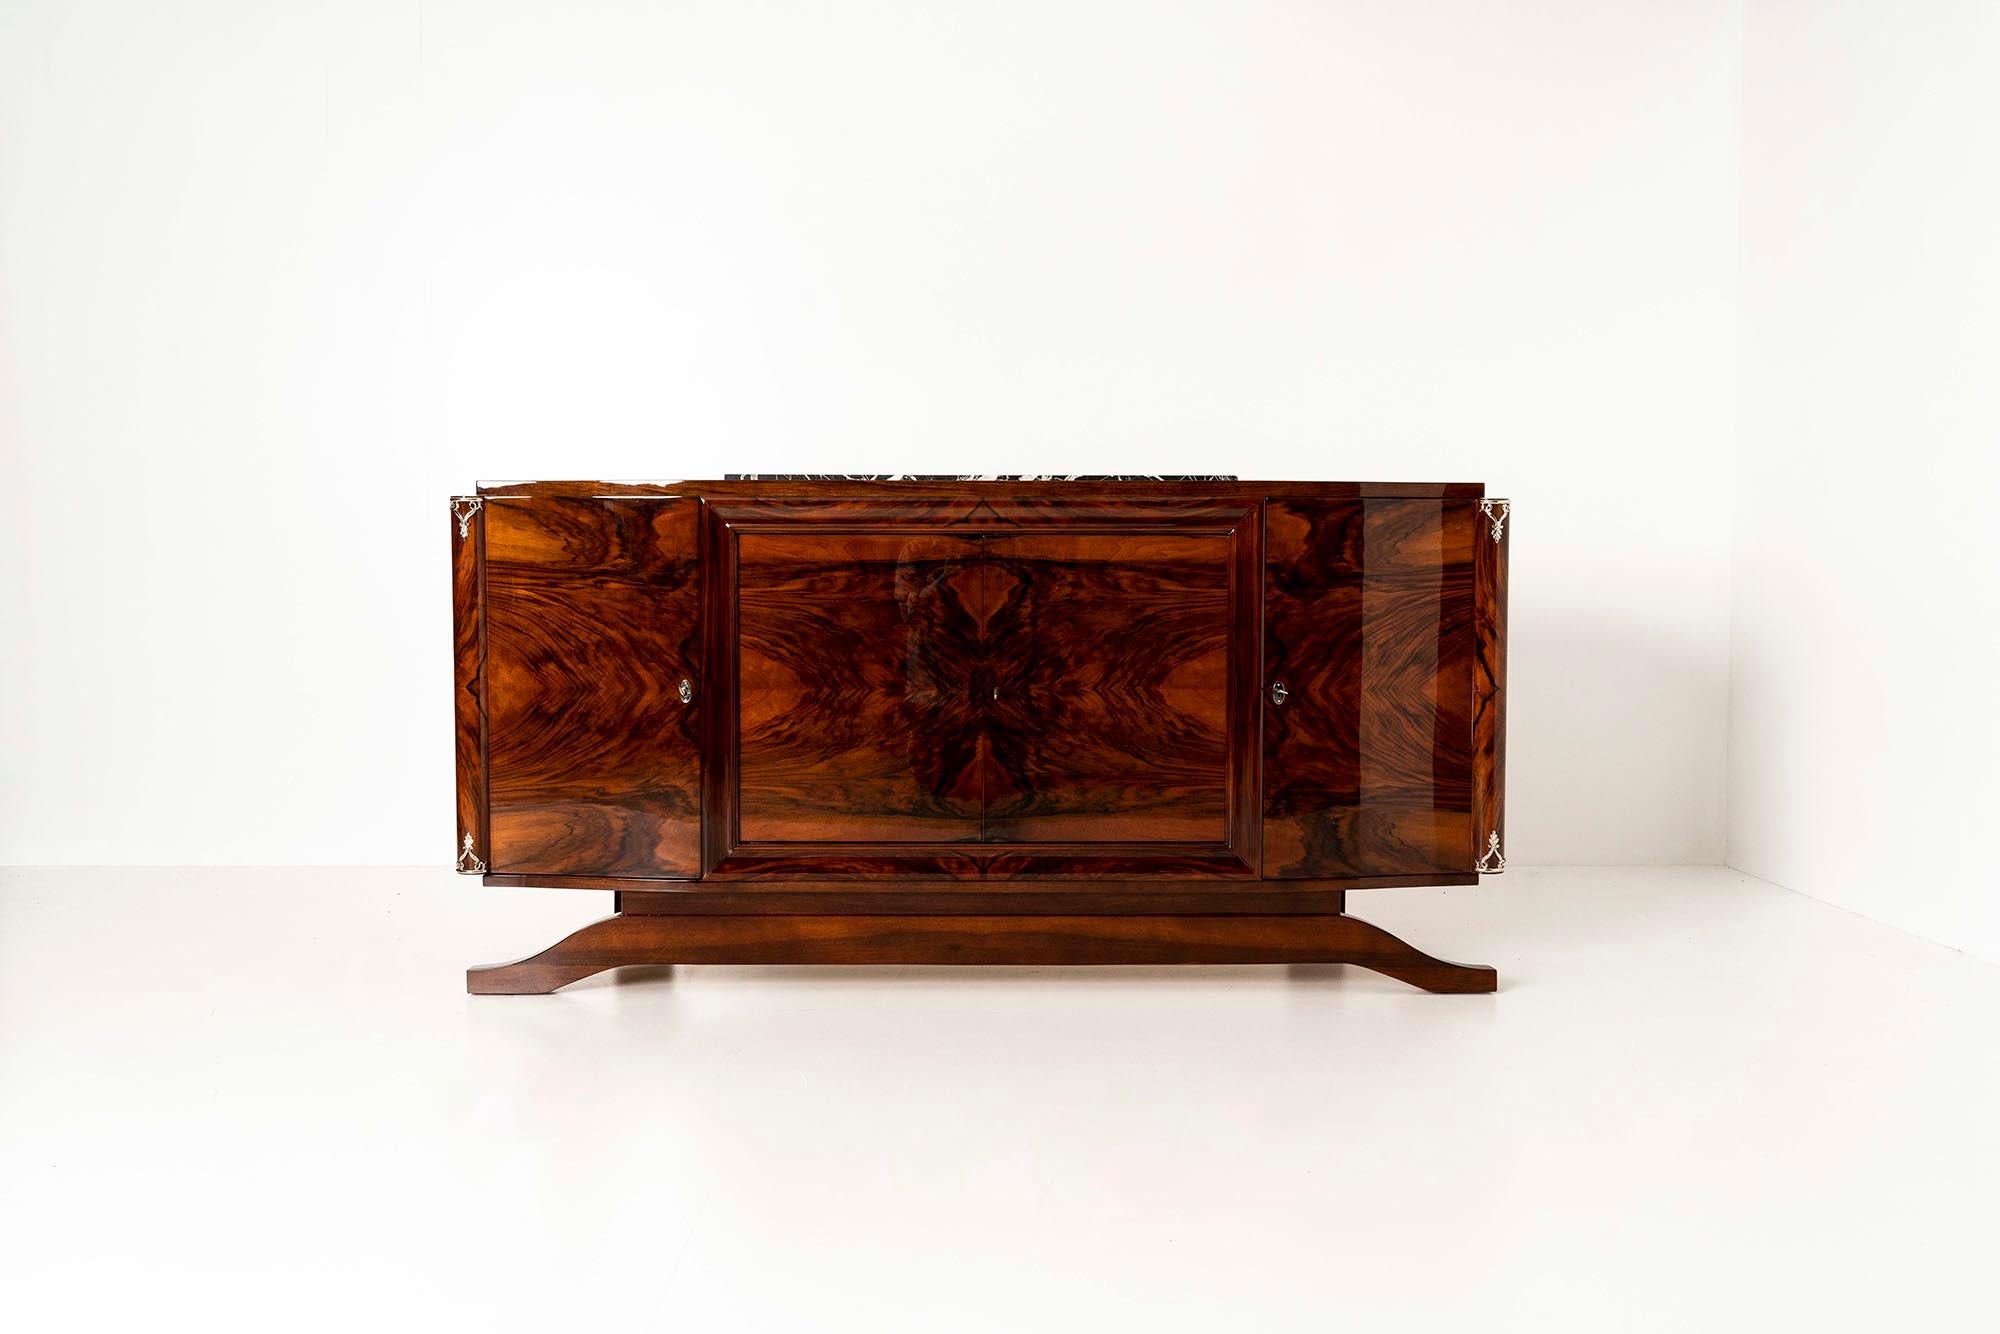 French Art Deco Sideboard in Walnut Burl and Marble, France 1930s For Sale